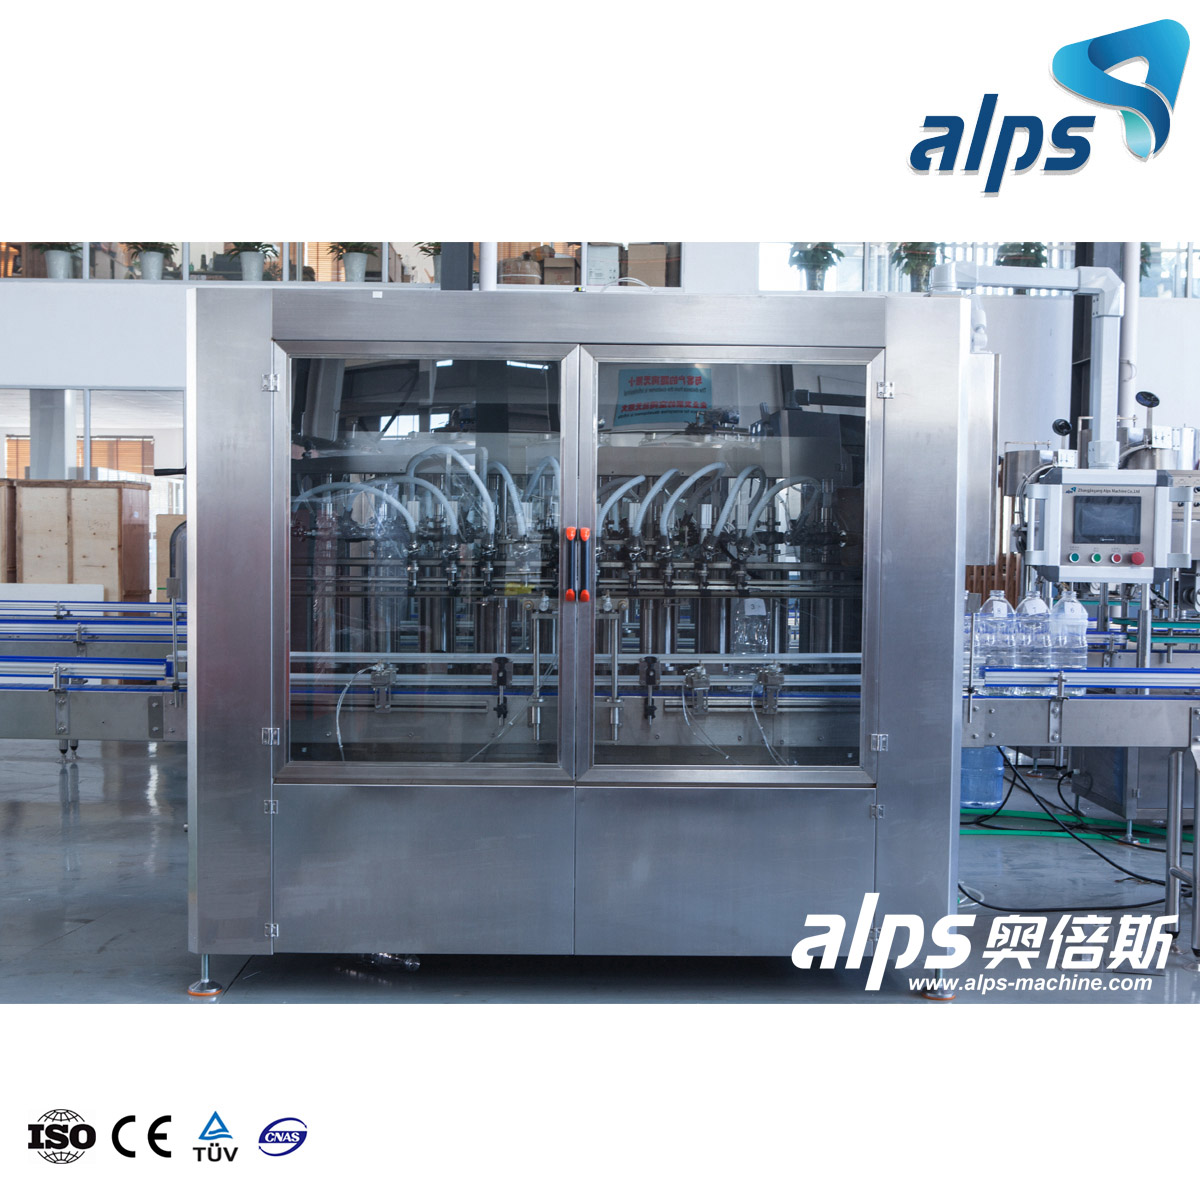 Automatic Linear Type Liquid Filling Machine for Shampoo And Detergent